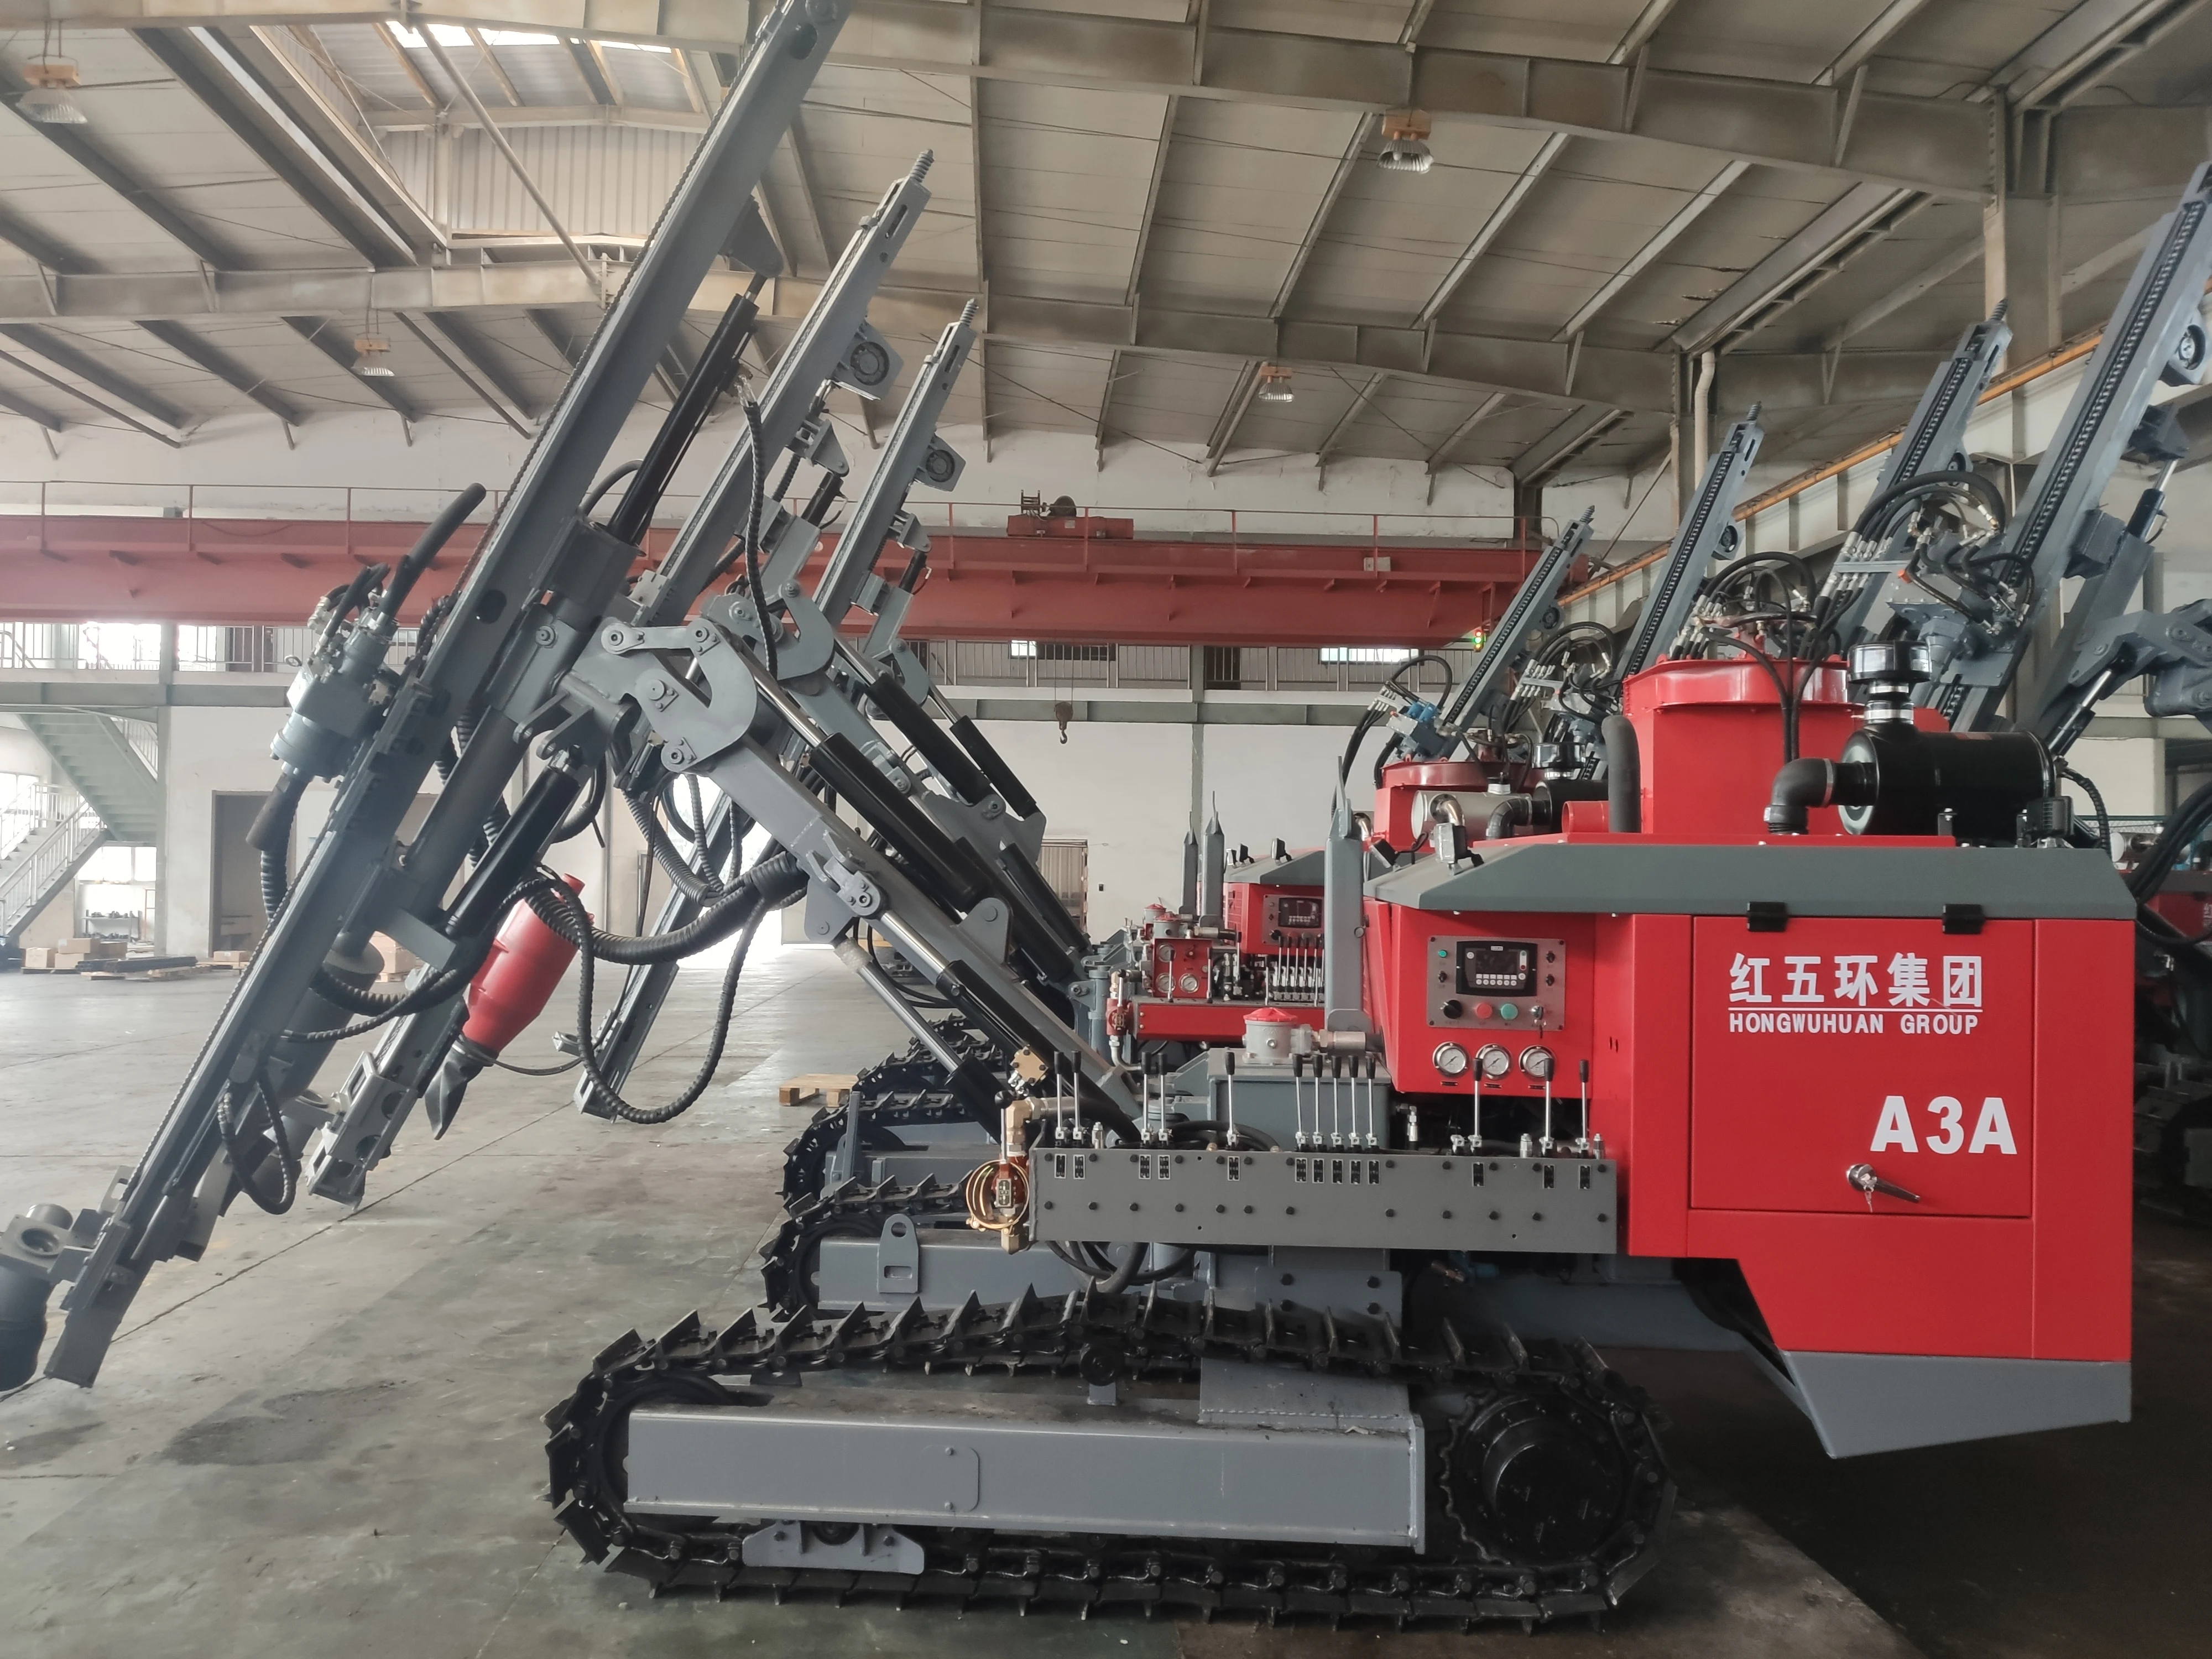 Hongwuhuan A3 hydraulic top hammer 90-115 mm 25 meters separated DTH Drill Rig Well Drilling hard rock for coal mine